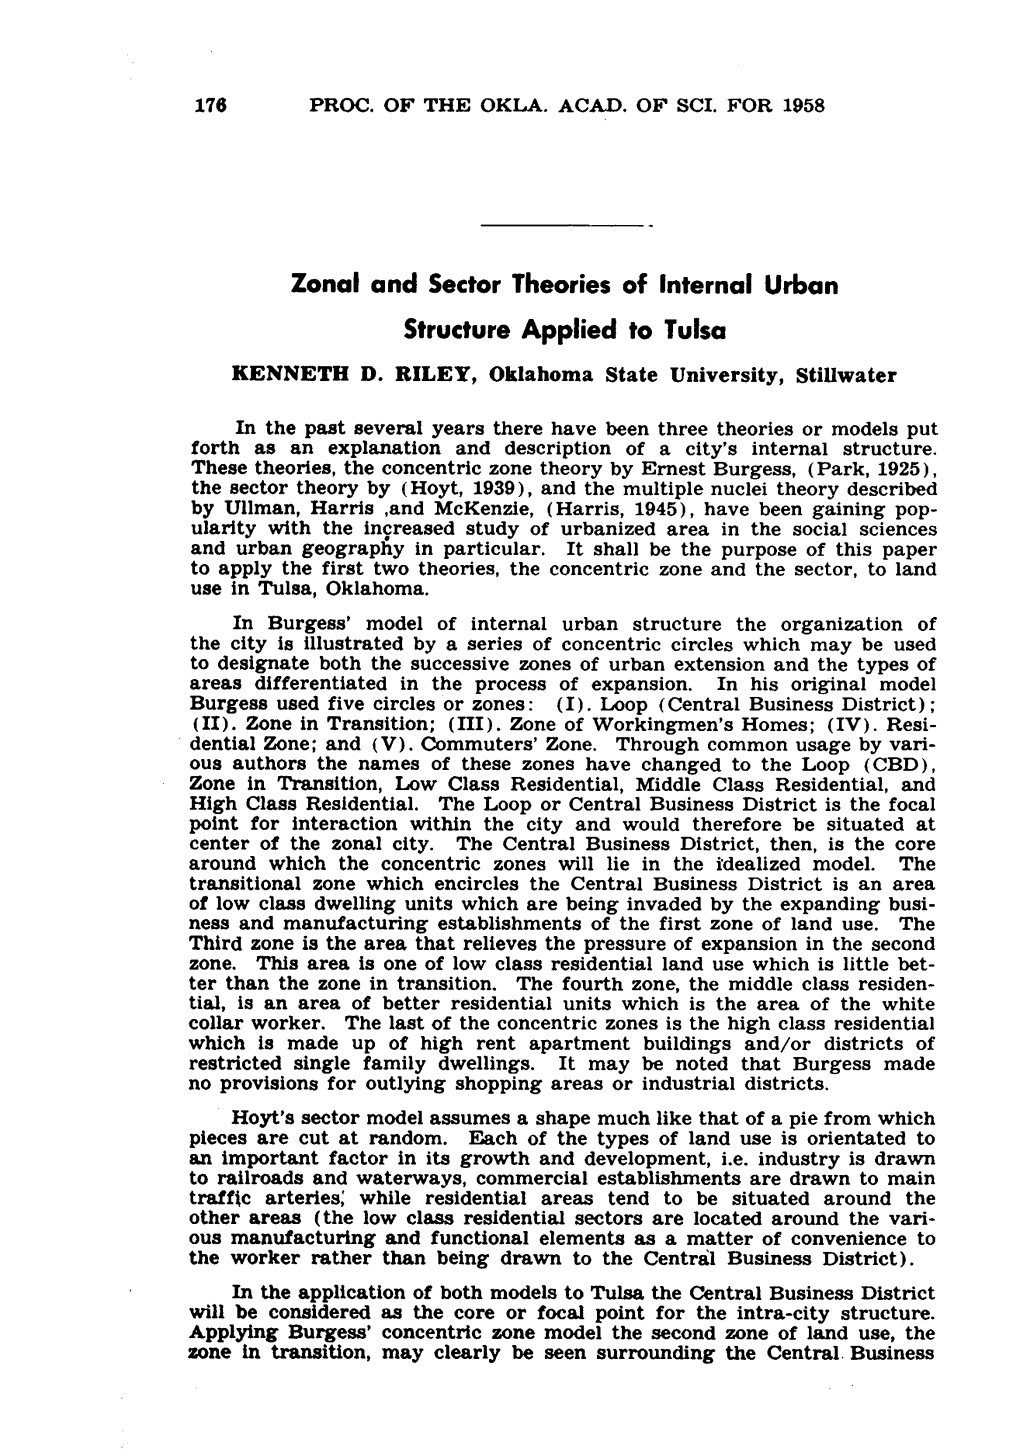 Zonal and Sector Theories of Internal Urban Structure Applied to Tulsa KENNETH D